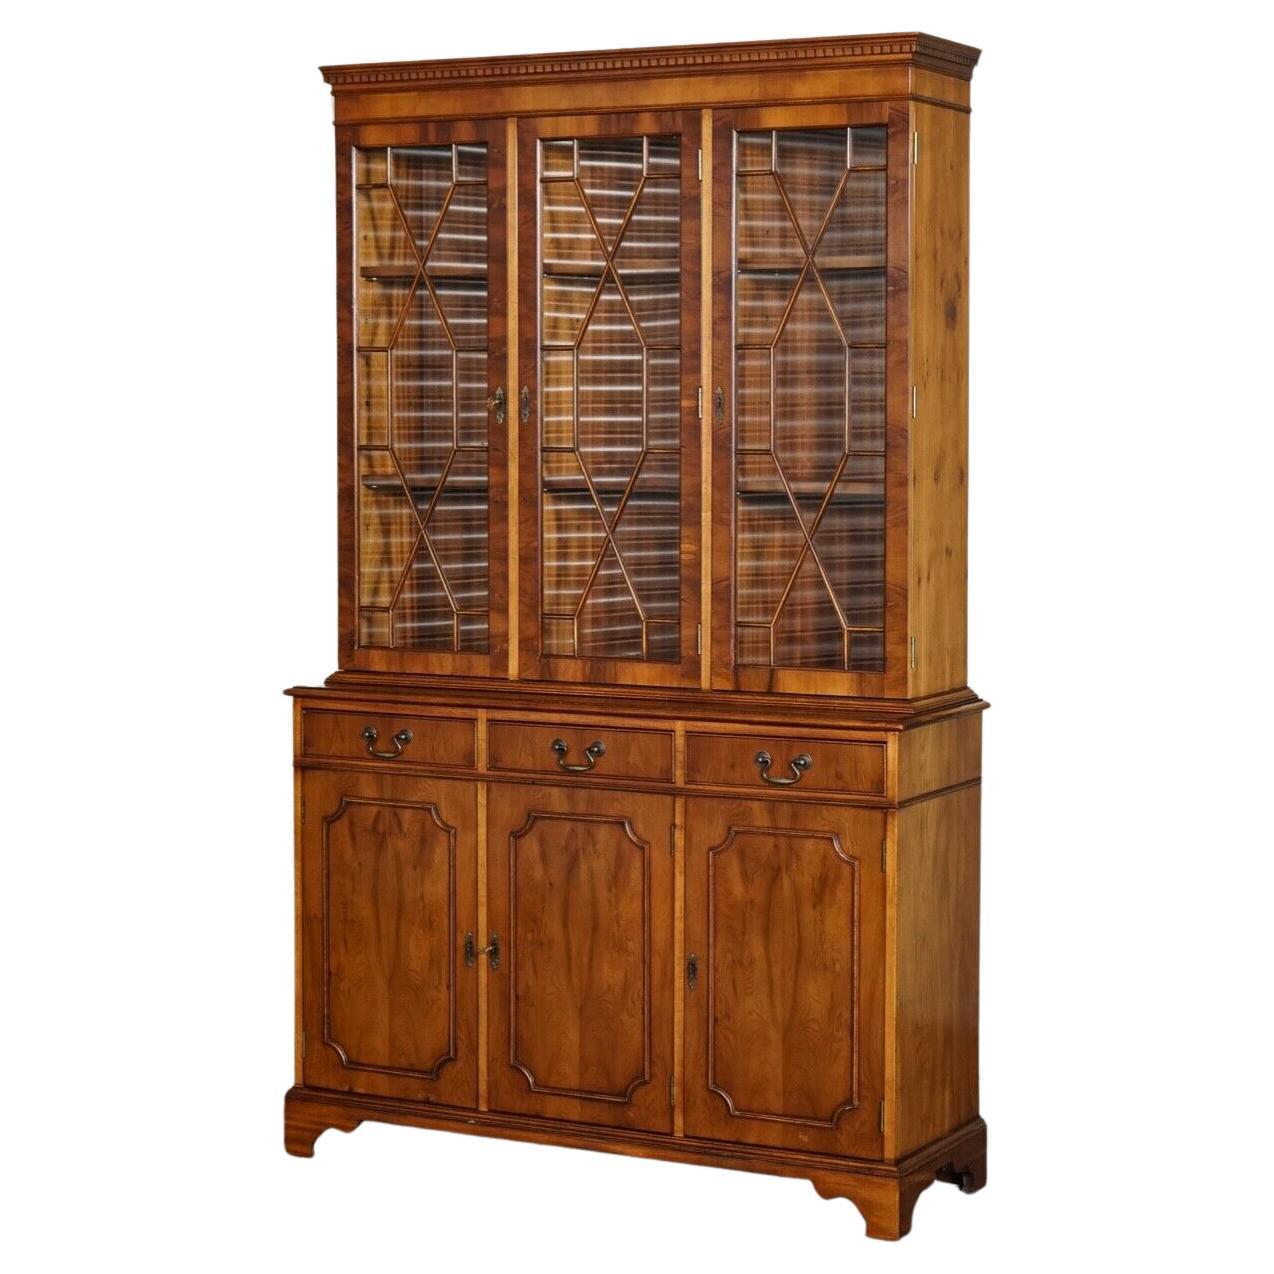 STUNNING VINTAGE BURR YEW WOOD DISPLAY CABINET BOOKCASE WiTH KEYS